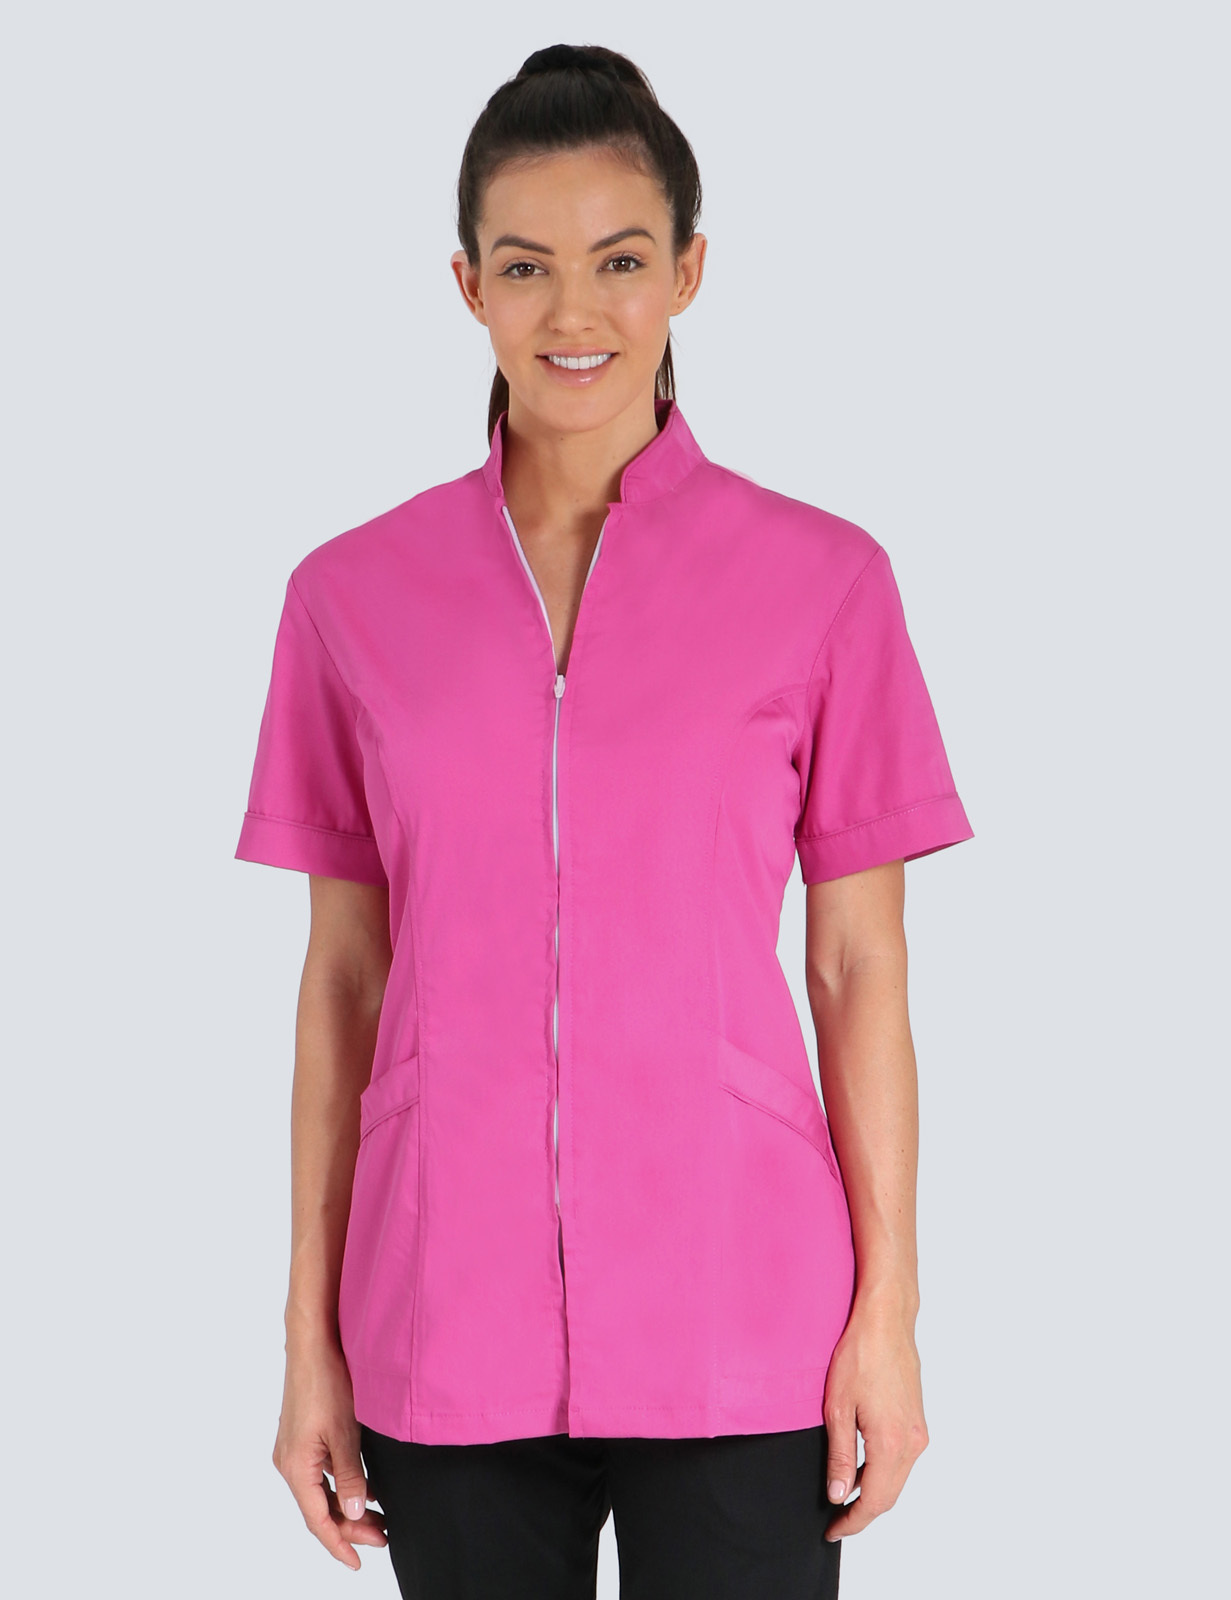 Nellie Style Tunic Top - Pink - 3X Large